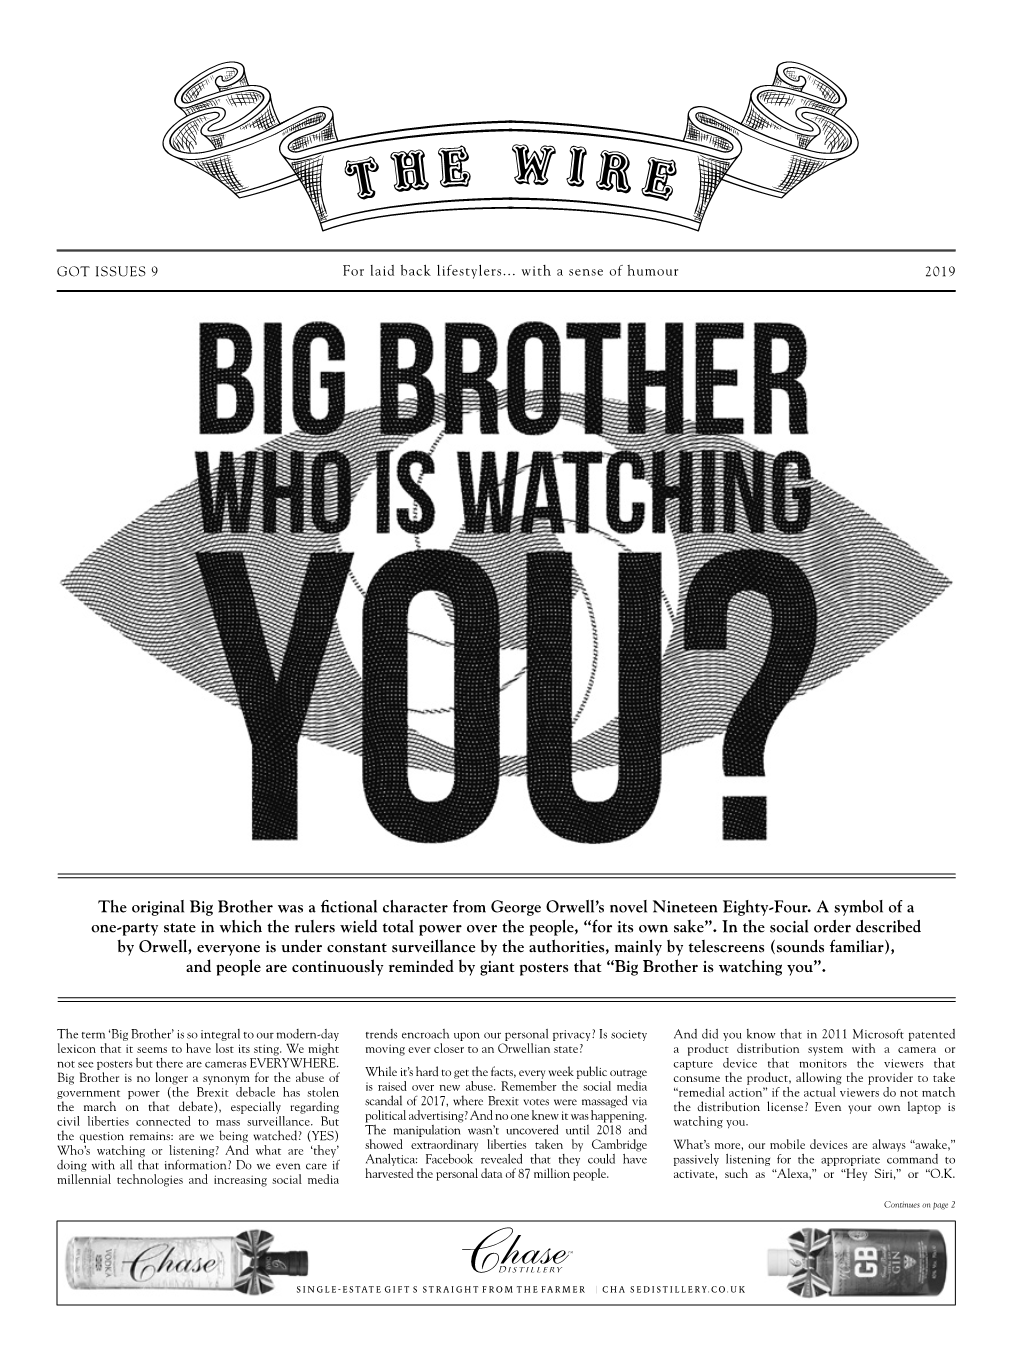 The Original Big Brother Was a Fictional Character from George Orwell's